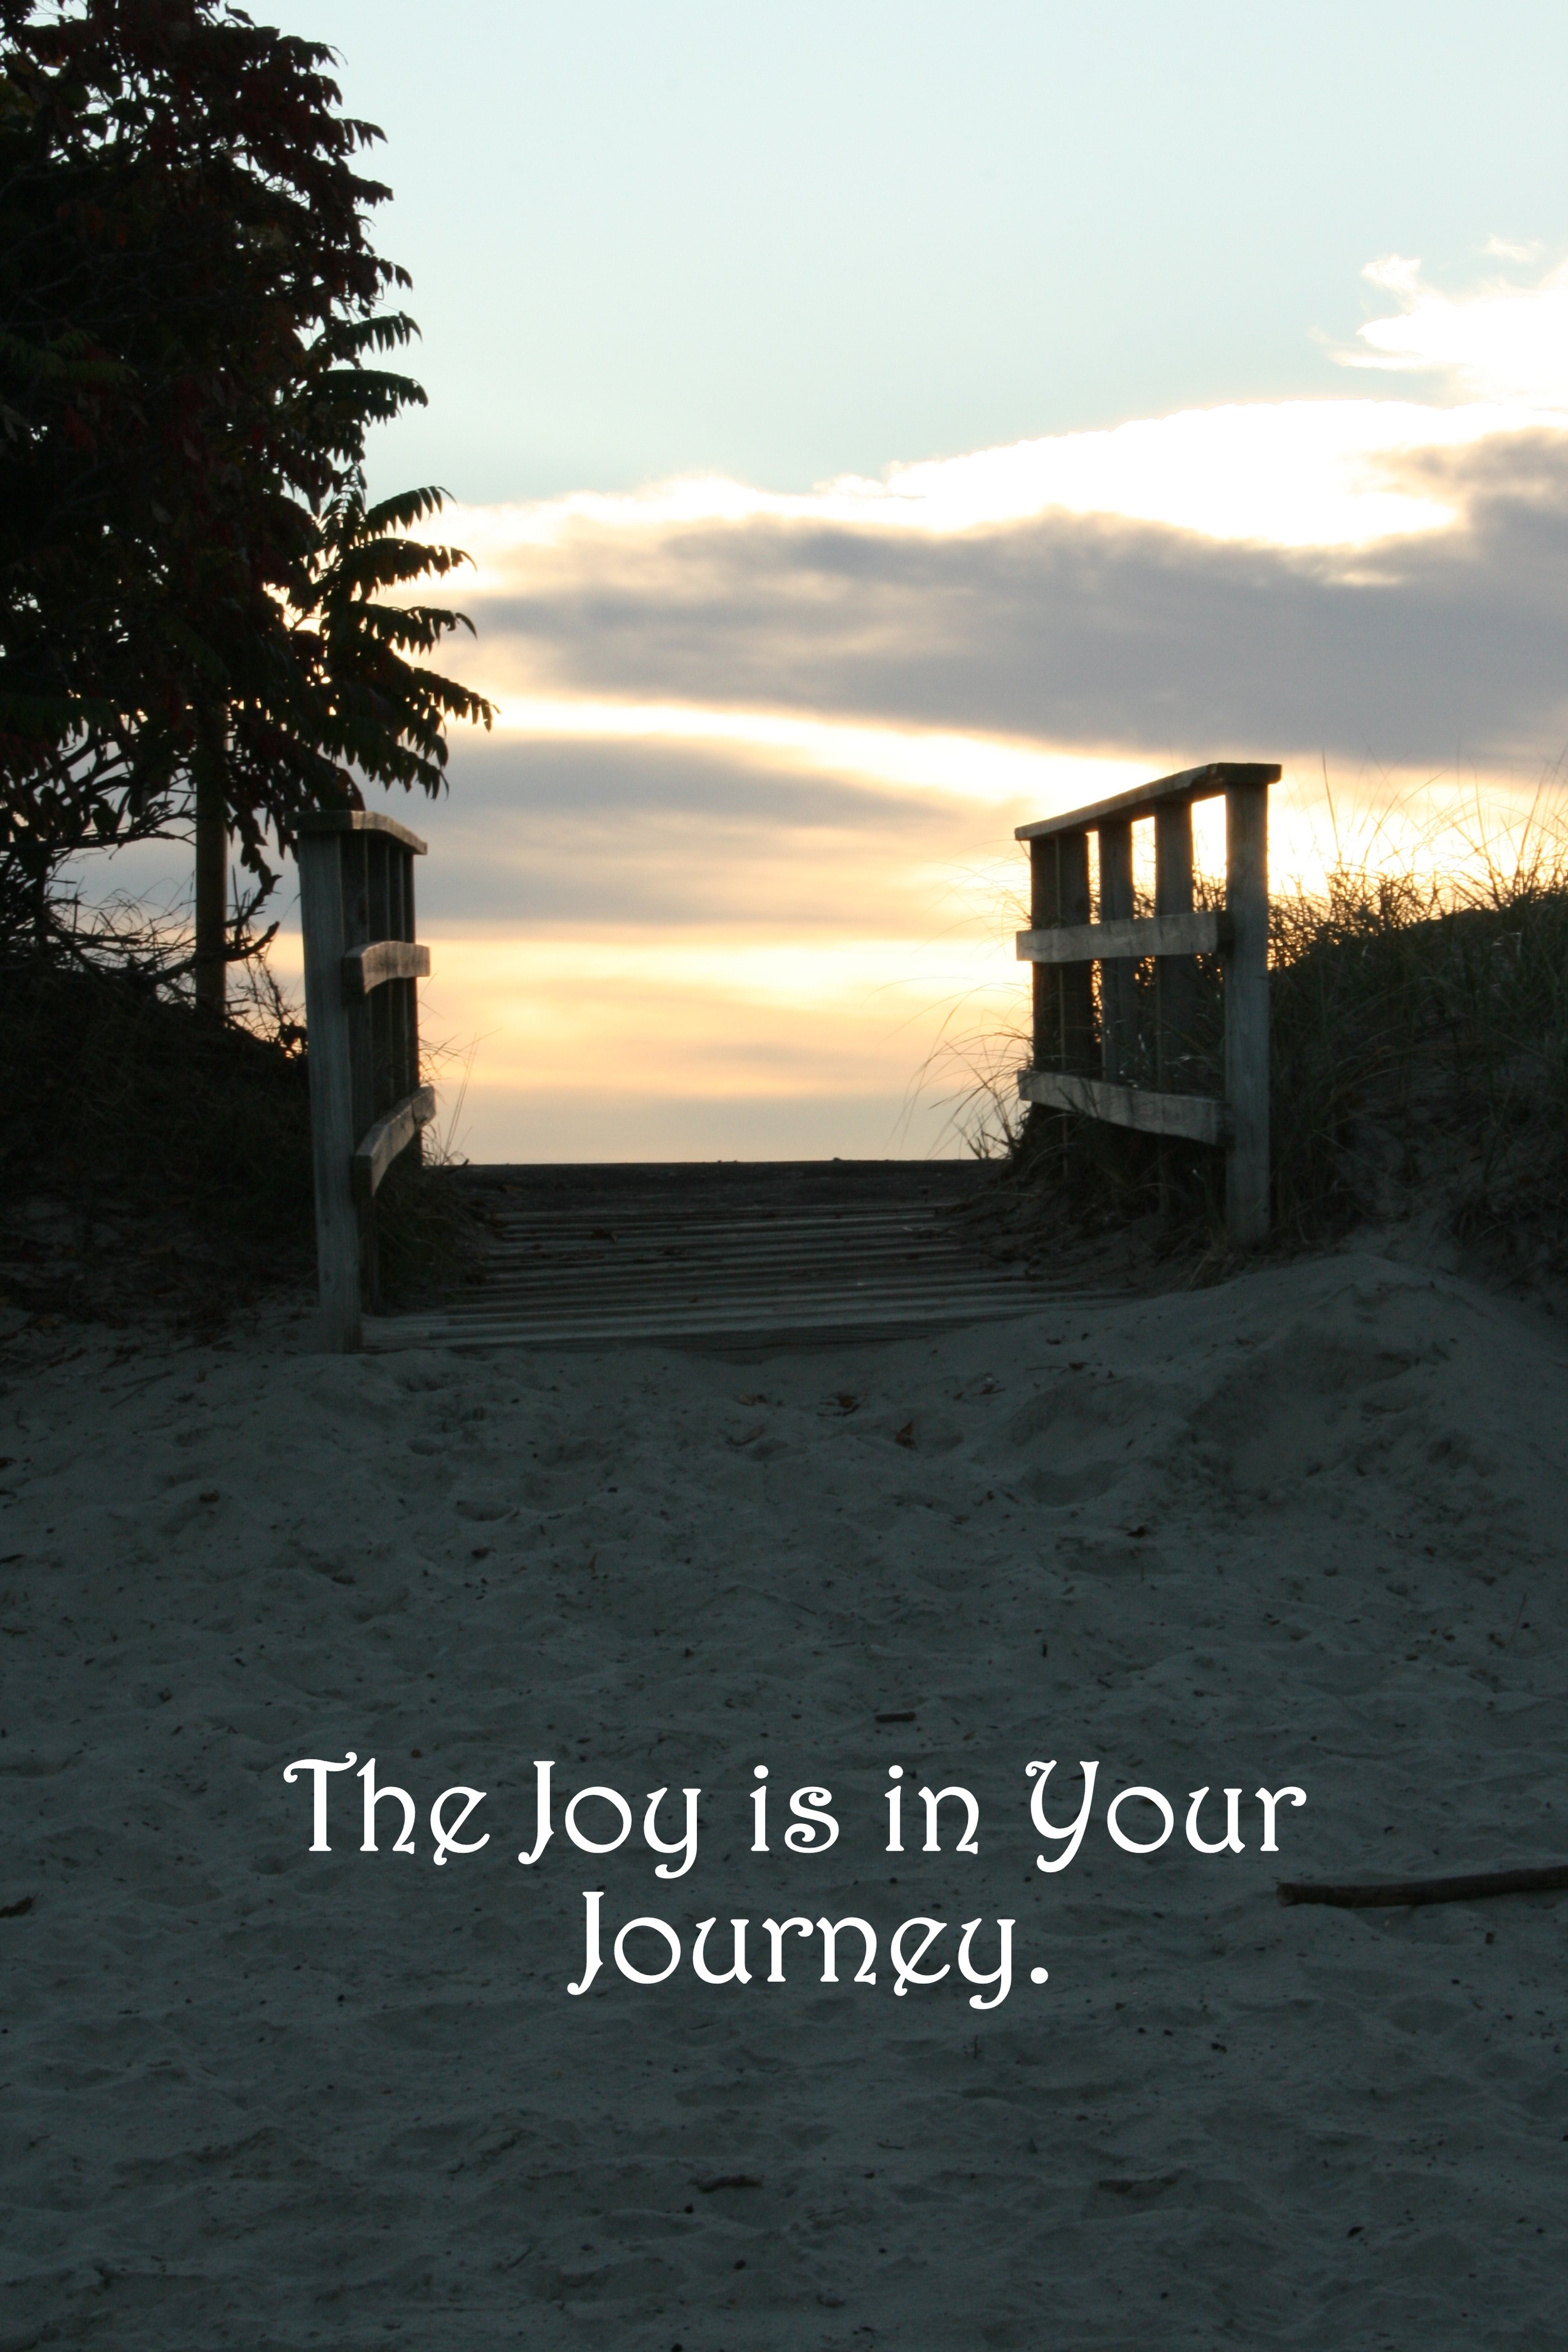 Sand path_The Joy is in Your journey.jpg